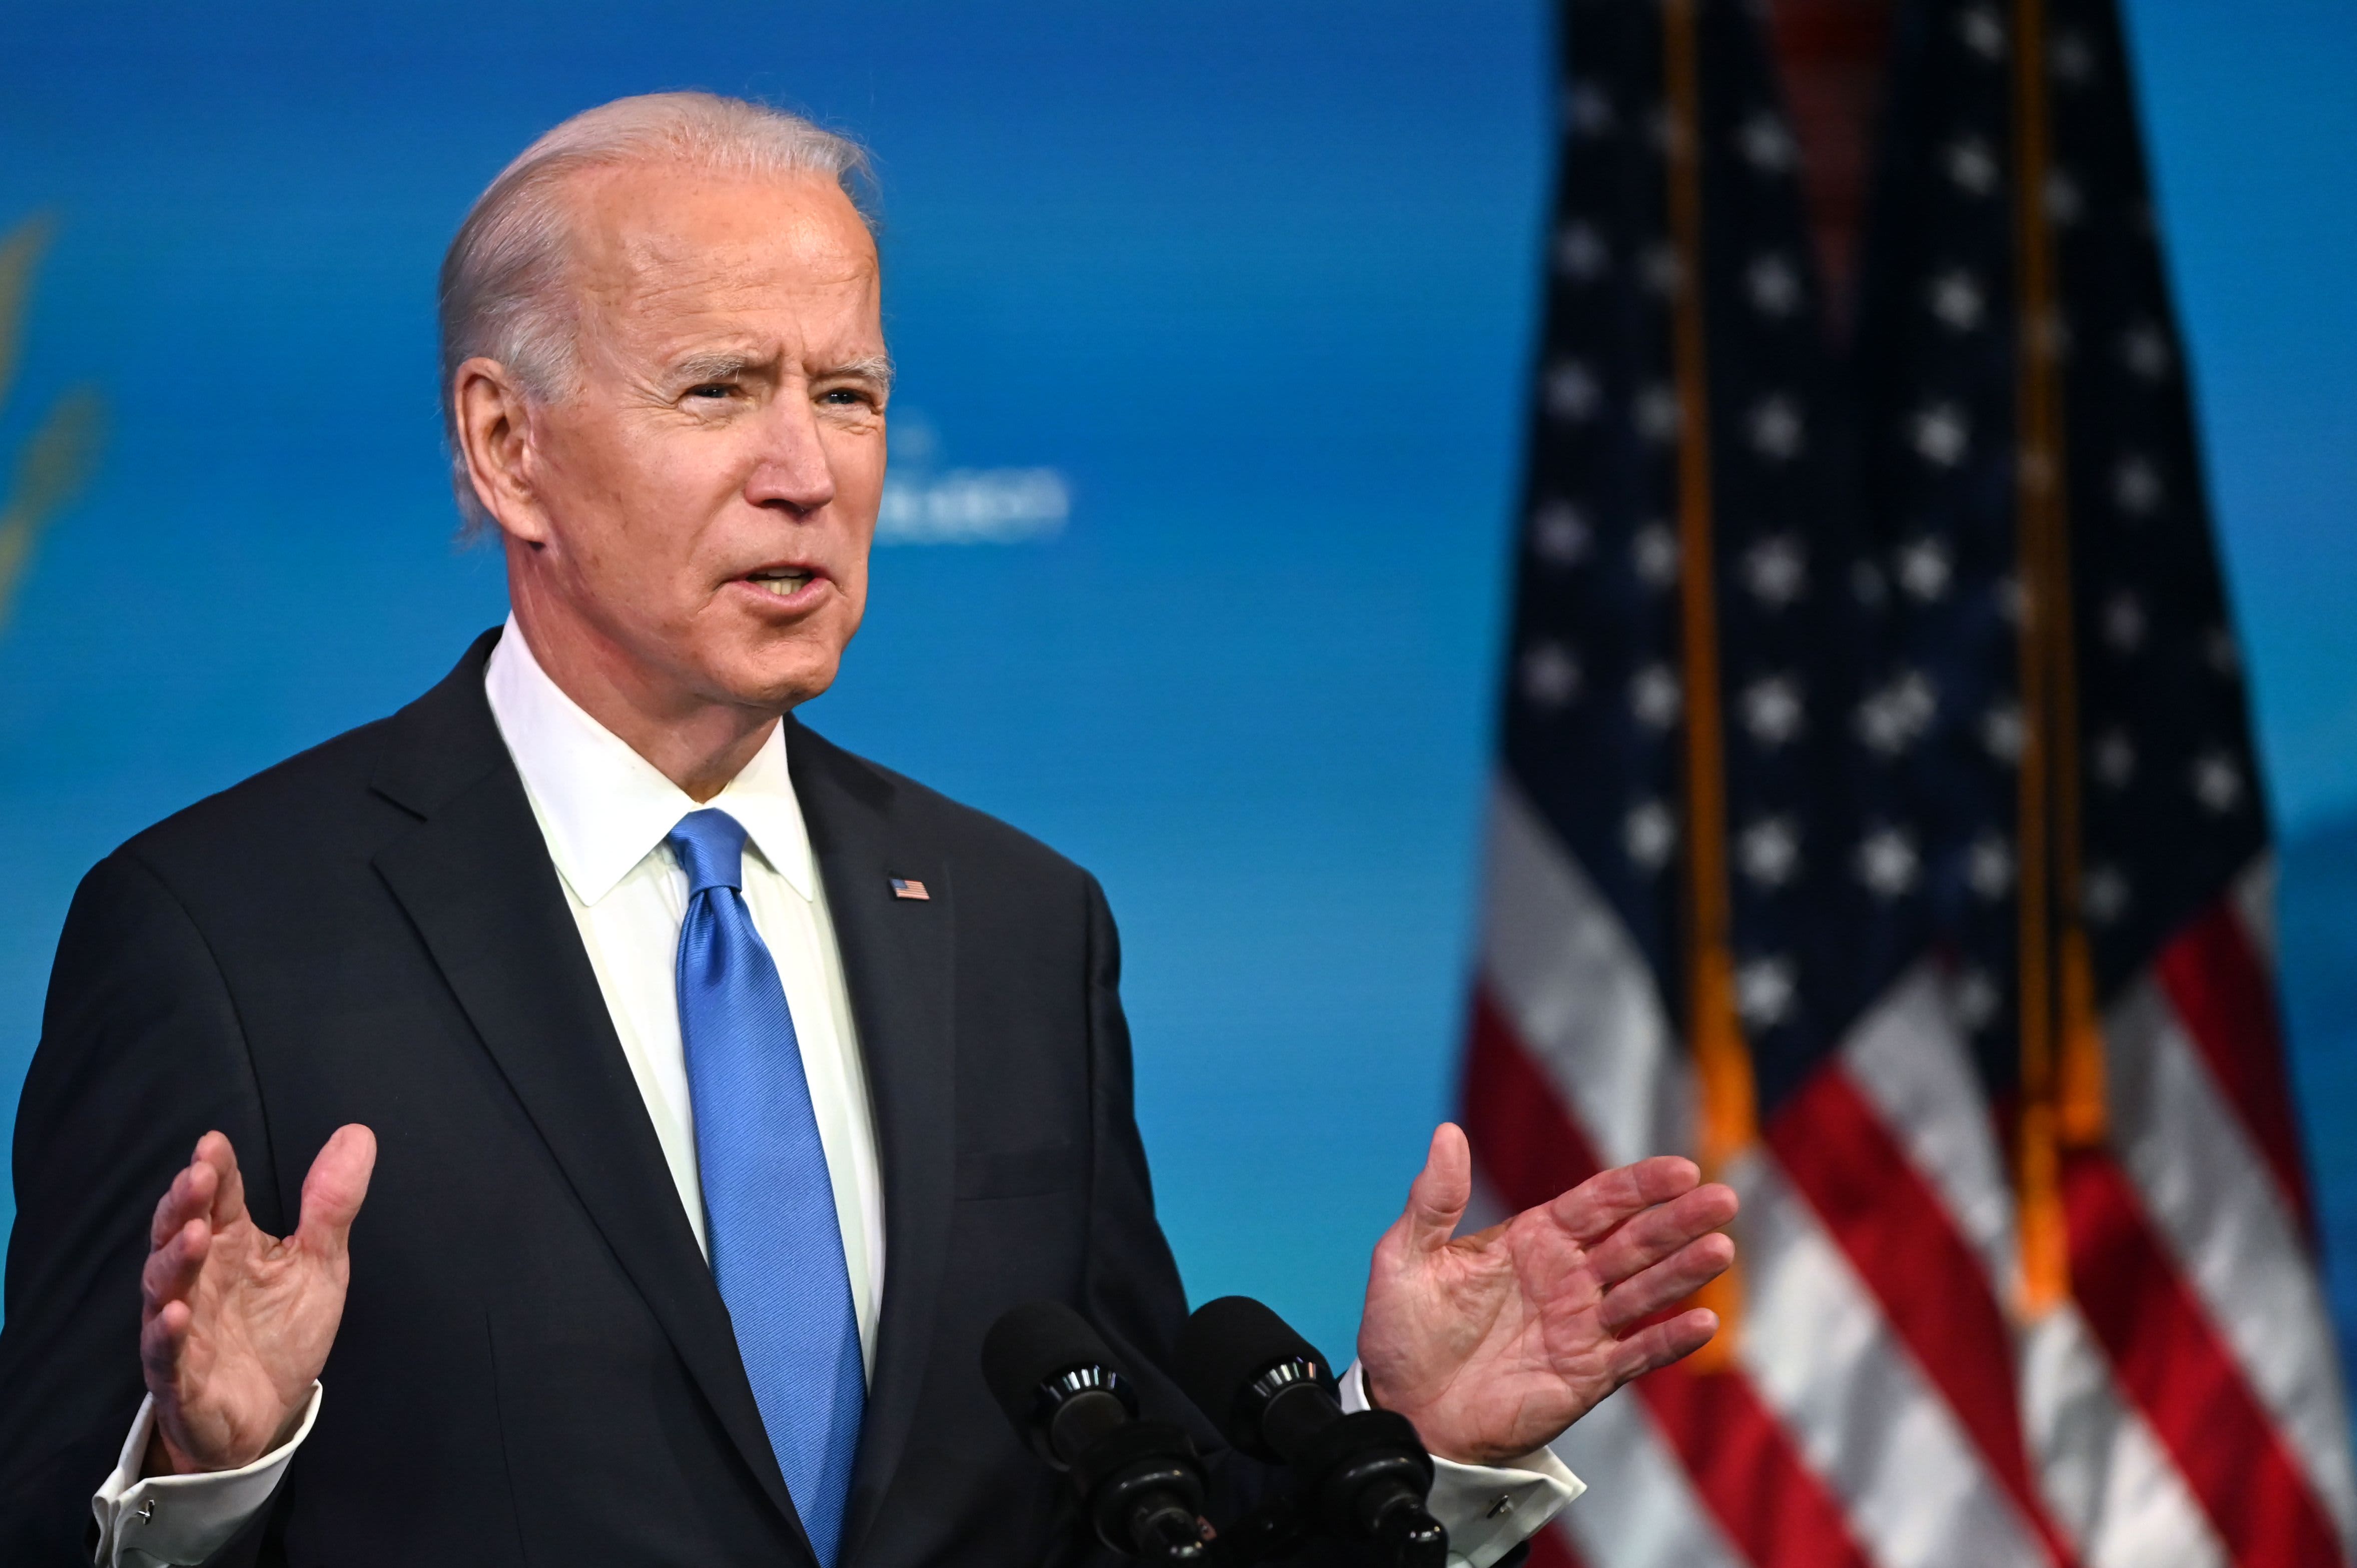 How Biden will approach the U.S. battle with China for technology